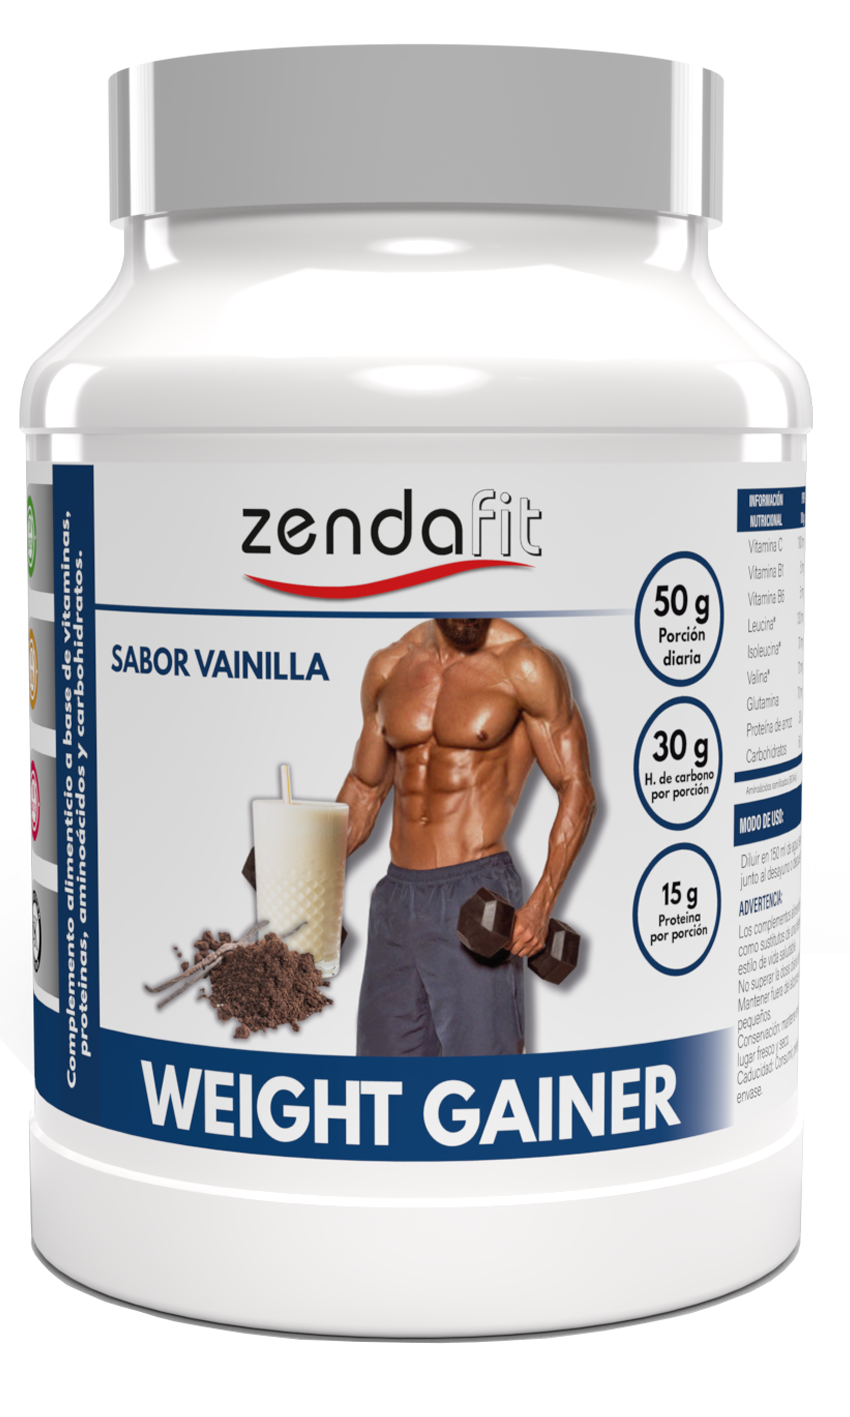 Weight Gainer (Ganador de Peso) Flavor Vanilla - 1800 grams (15g of proteins and 30g of carbohydrates per serving)